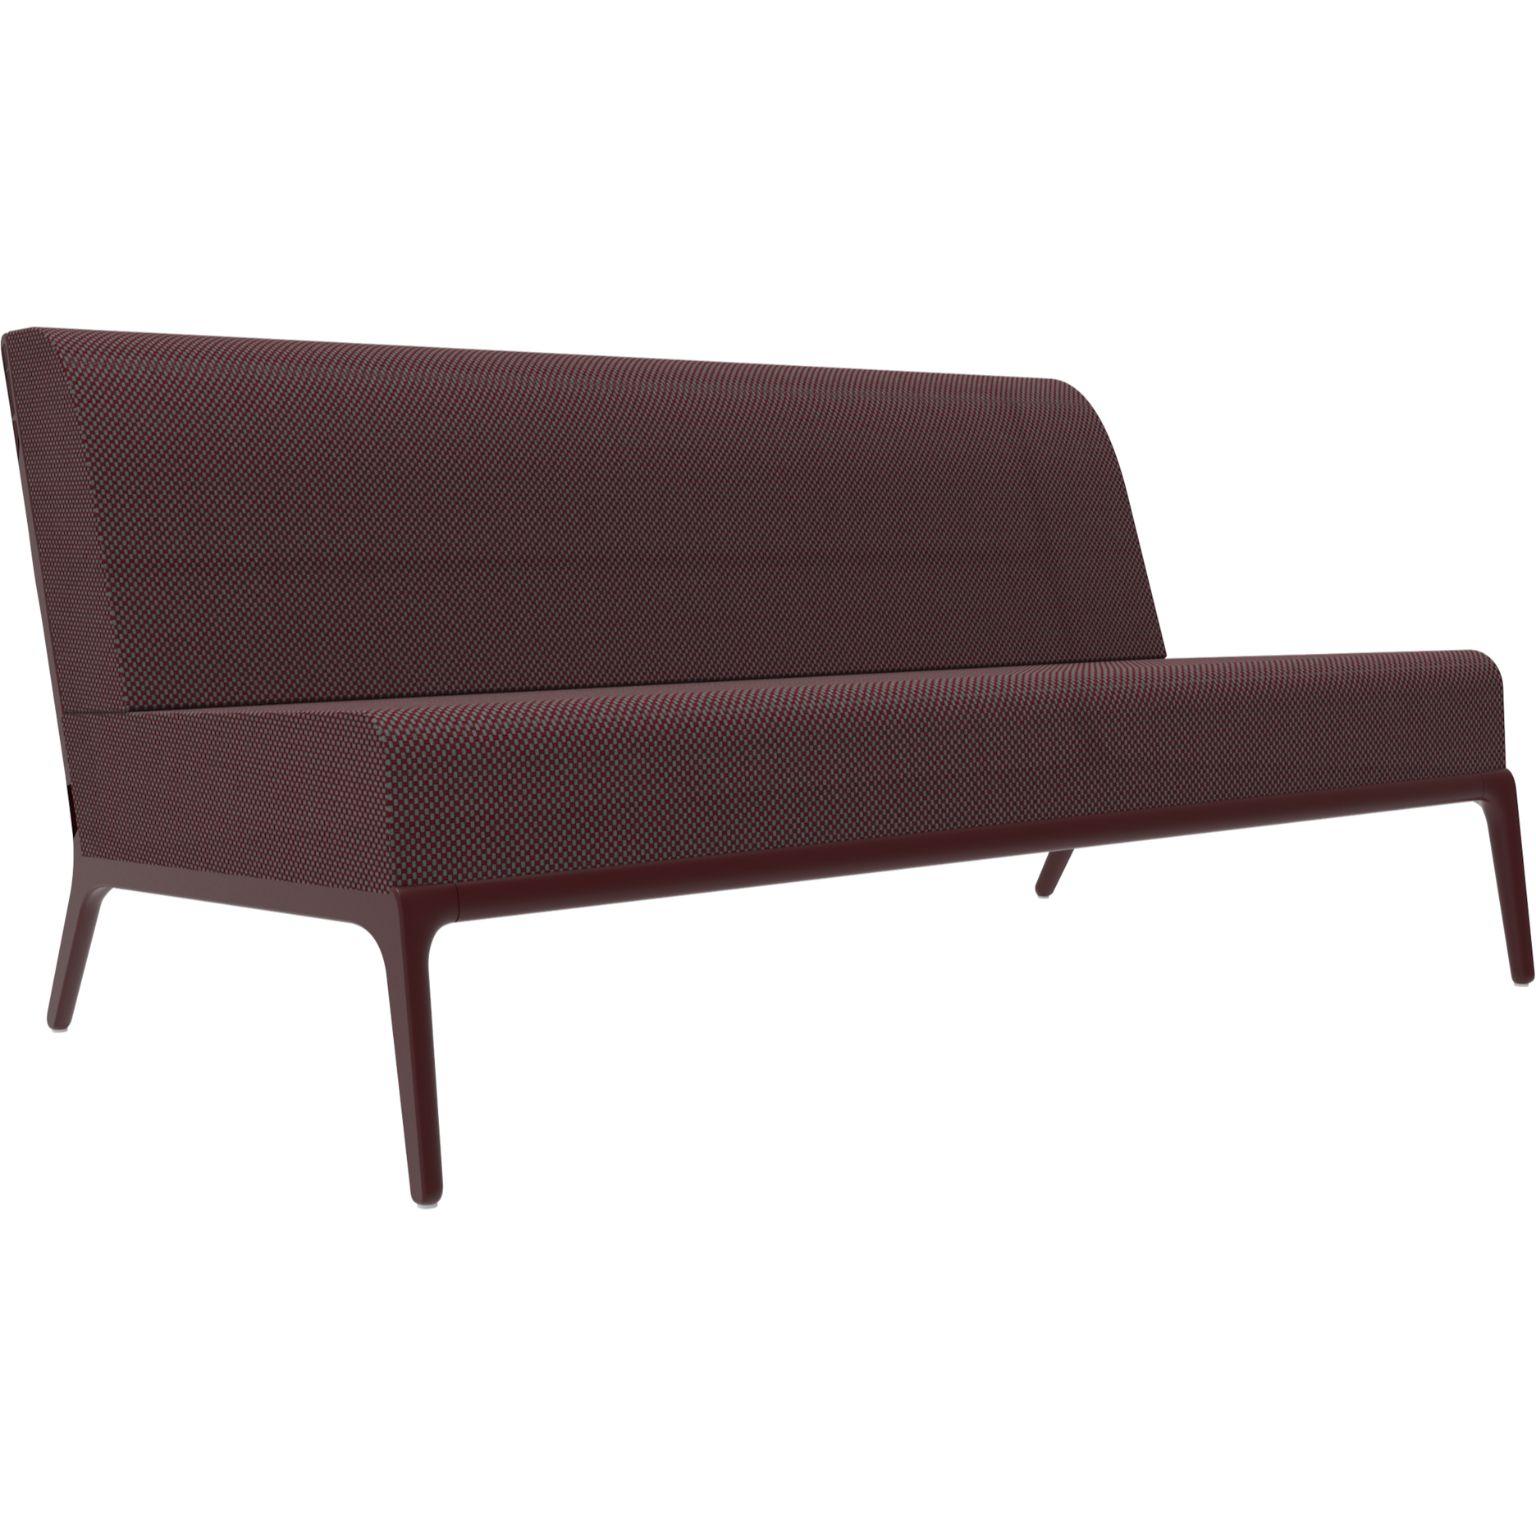 Xaloc Central 160 Burgundy modular sofa by MOWEE
Dimensions: D100 x W160 x H81 cm (Seat Height 42cm)
Material: Aluminum, Textile
Weight: 35.5 kg
Also Available in different colors and finishes. 

 Xaloc synthesizes the lines of interior